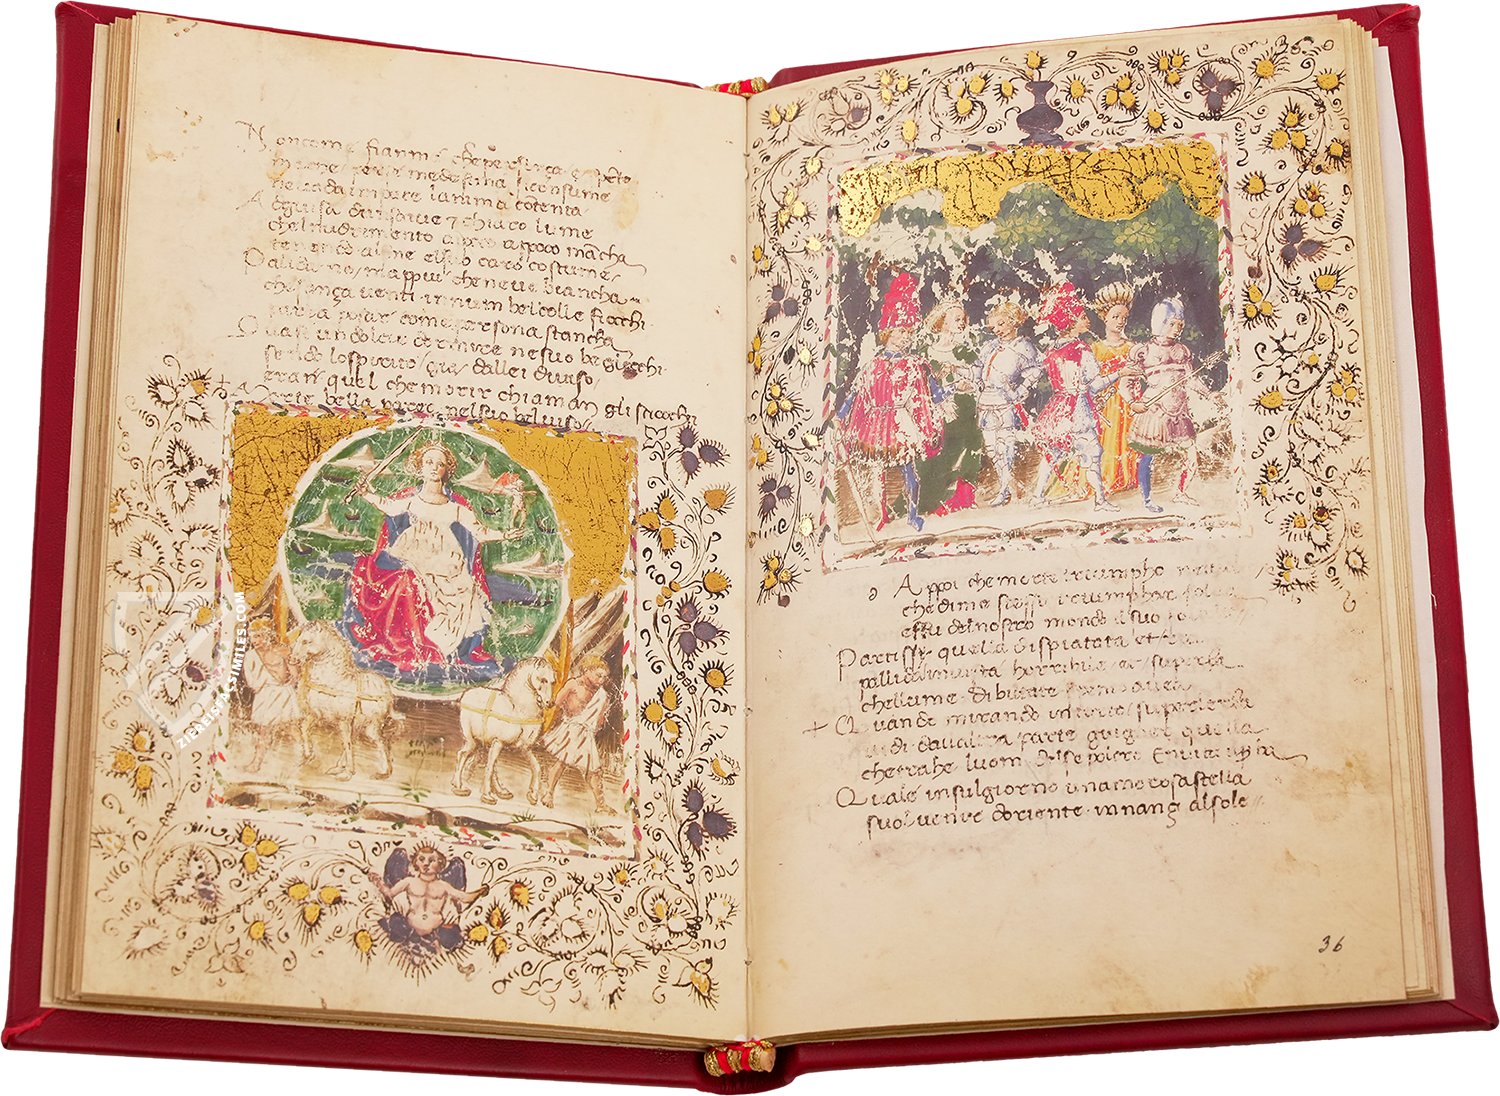 Petrarch's poem about the triumphs of good was among the most popular works of the Renaissance (Petrarca: Trionfi – Florence Codex, Florence (Italy) – mid-15th century).